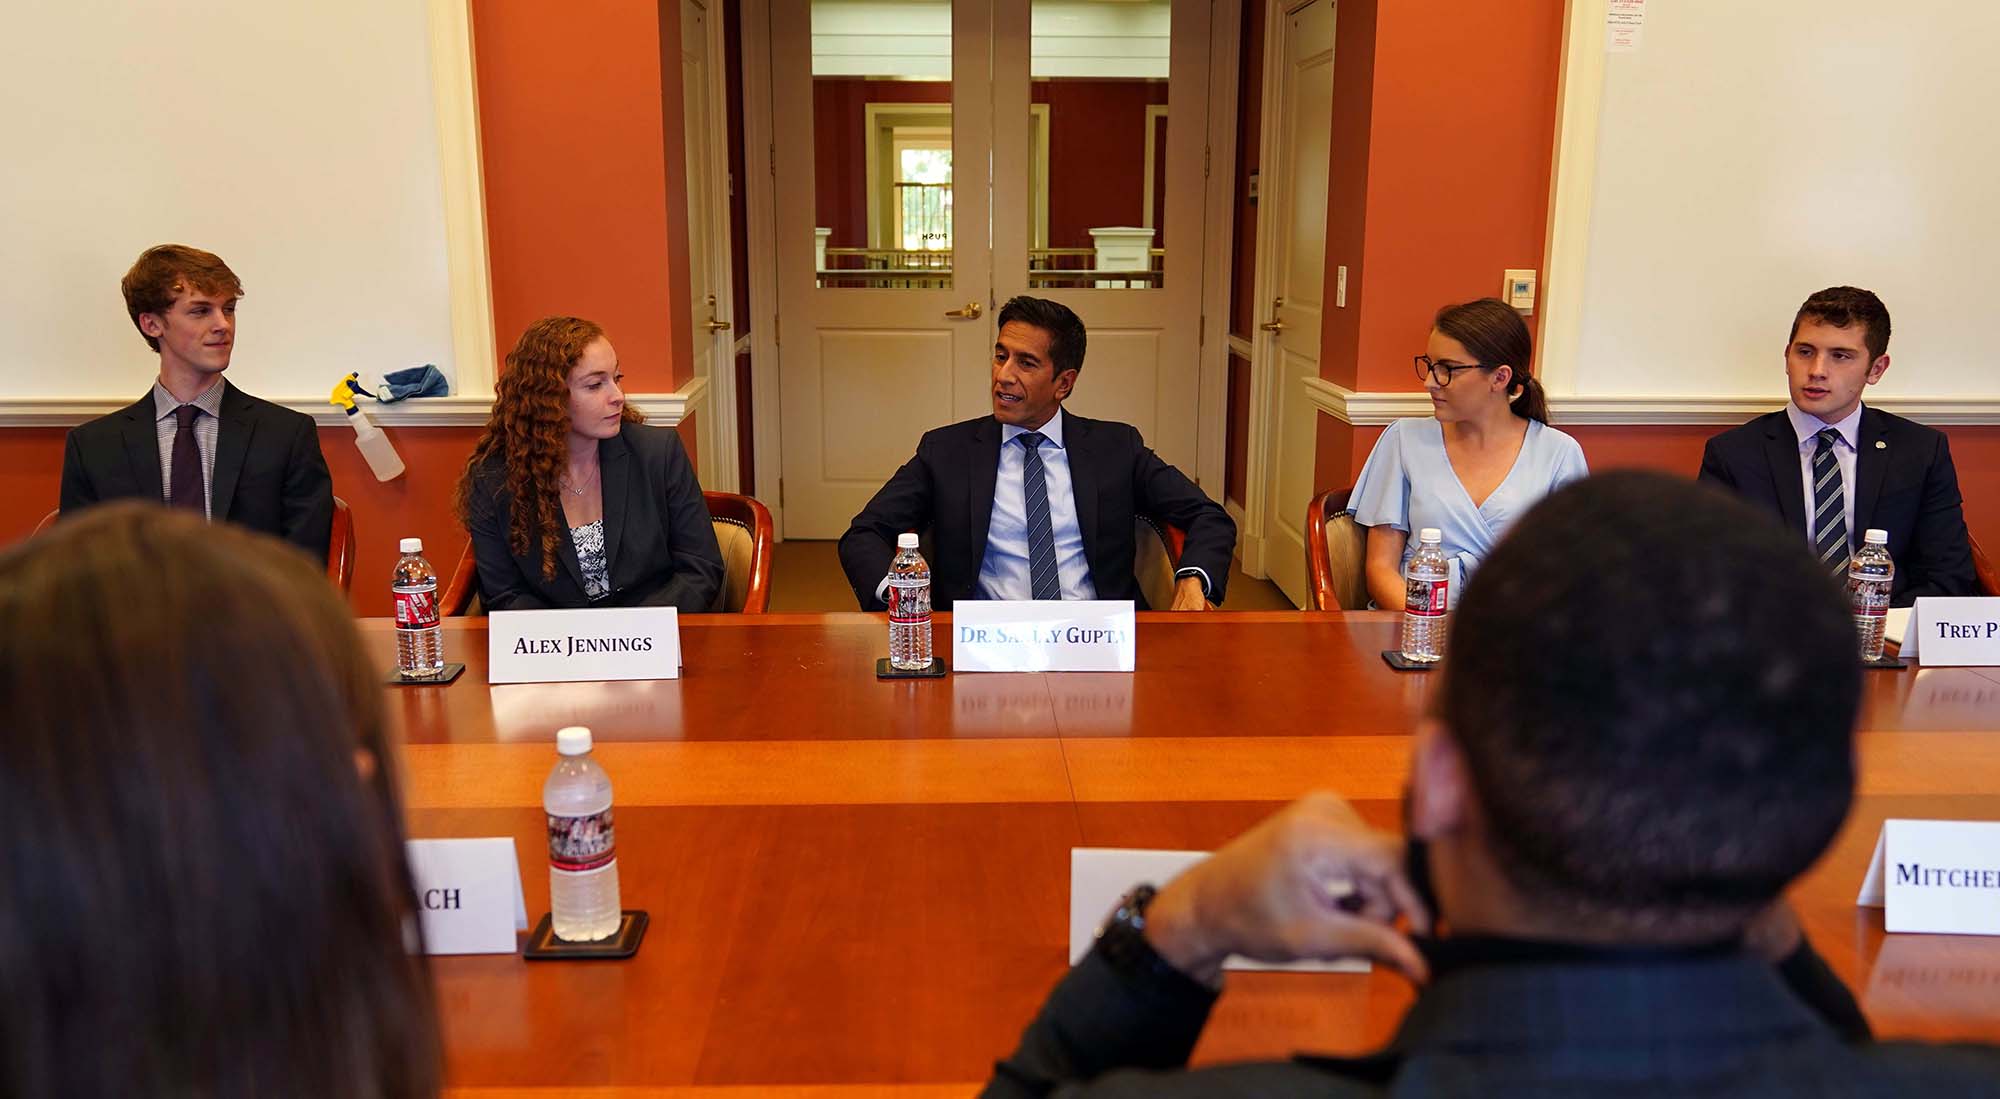 Dr. Sanjay Gupta talks with Farmer School students in a conference room.